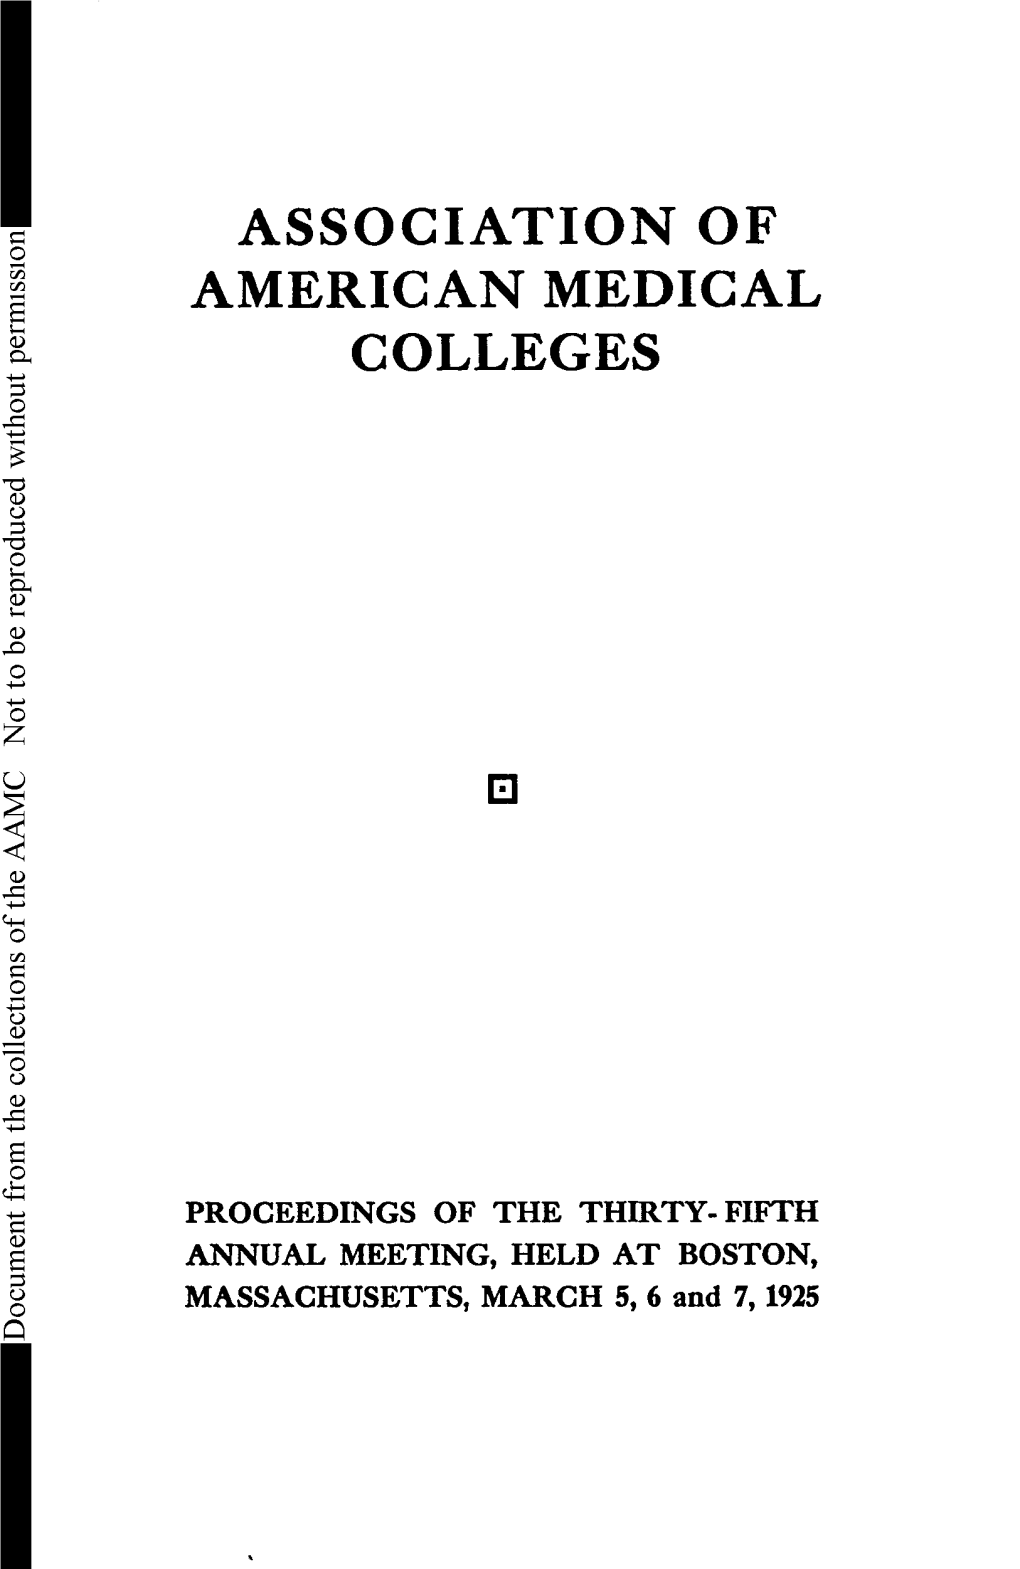 AAMC Proceedings of the Thirty-Fifth Annual Meeting Held at Boston, MA